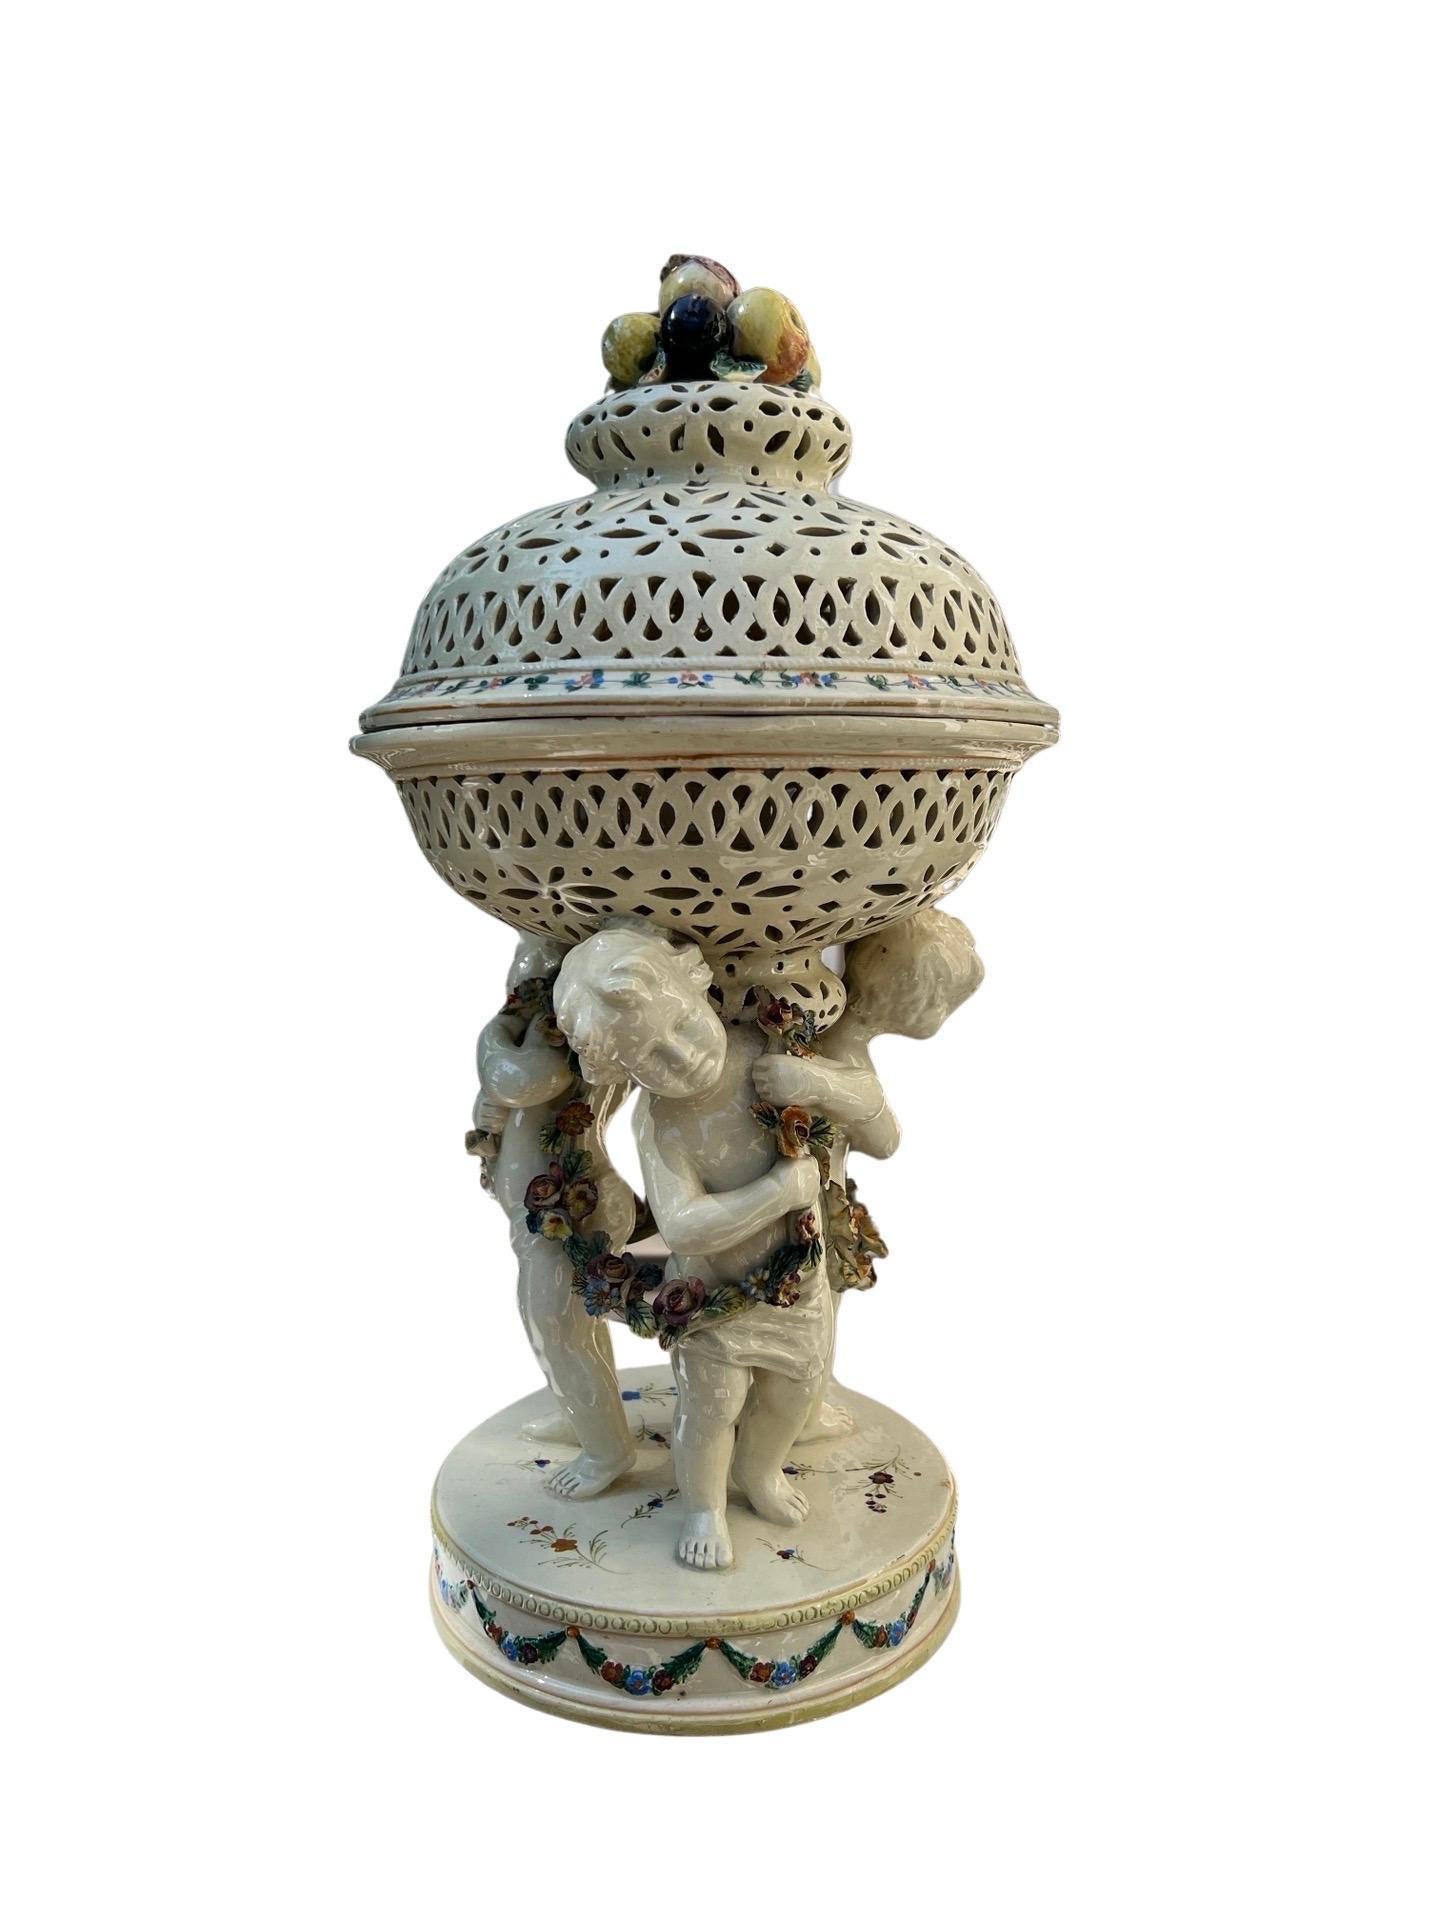 19th Century French Tin Glazed Creamware Centerpiece Adorned With Putti Supports For Sale 2